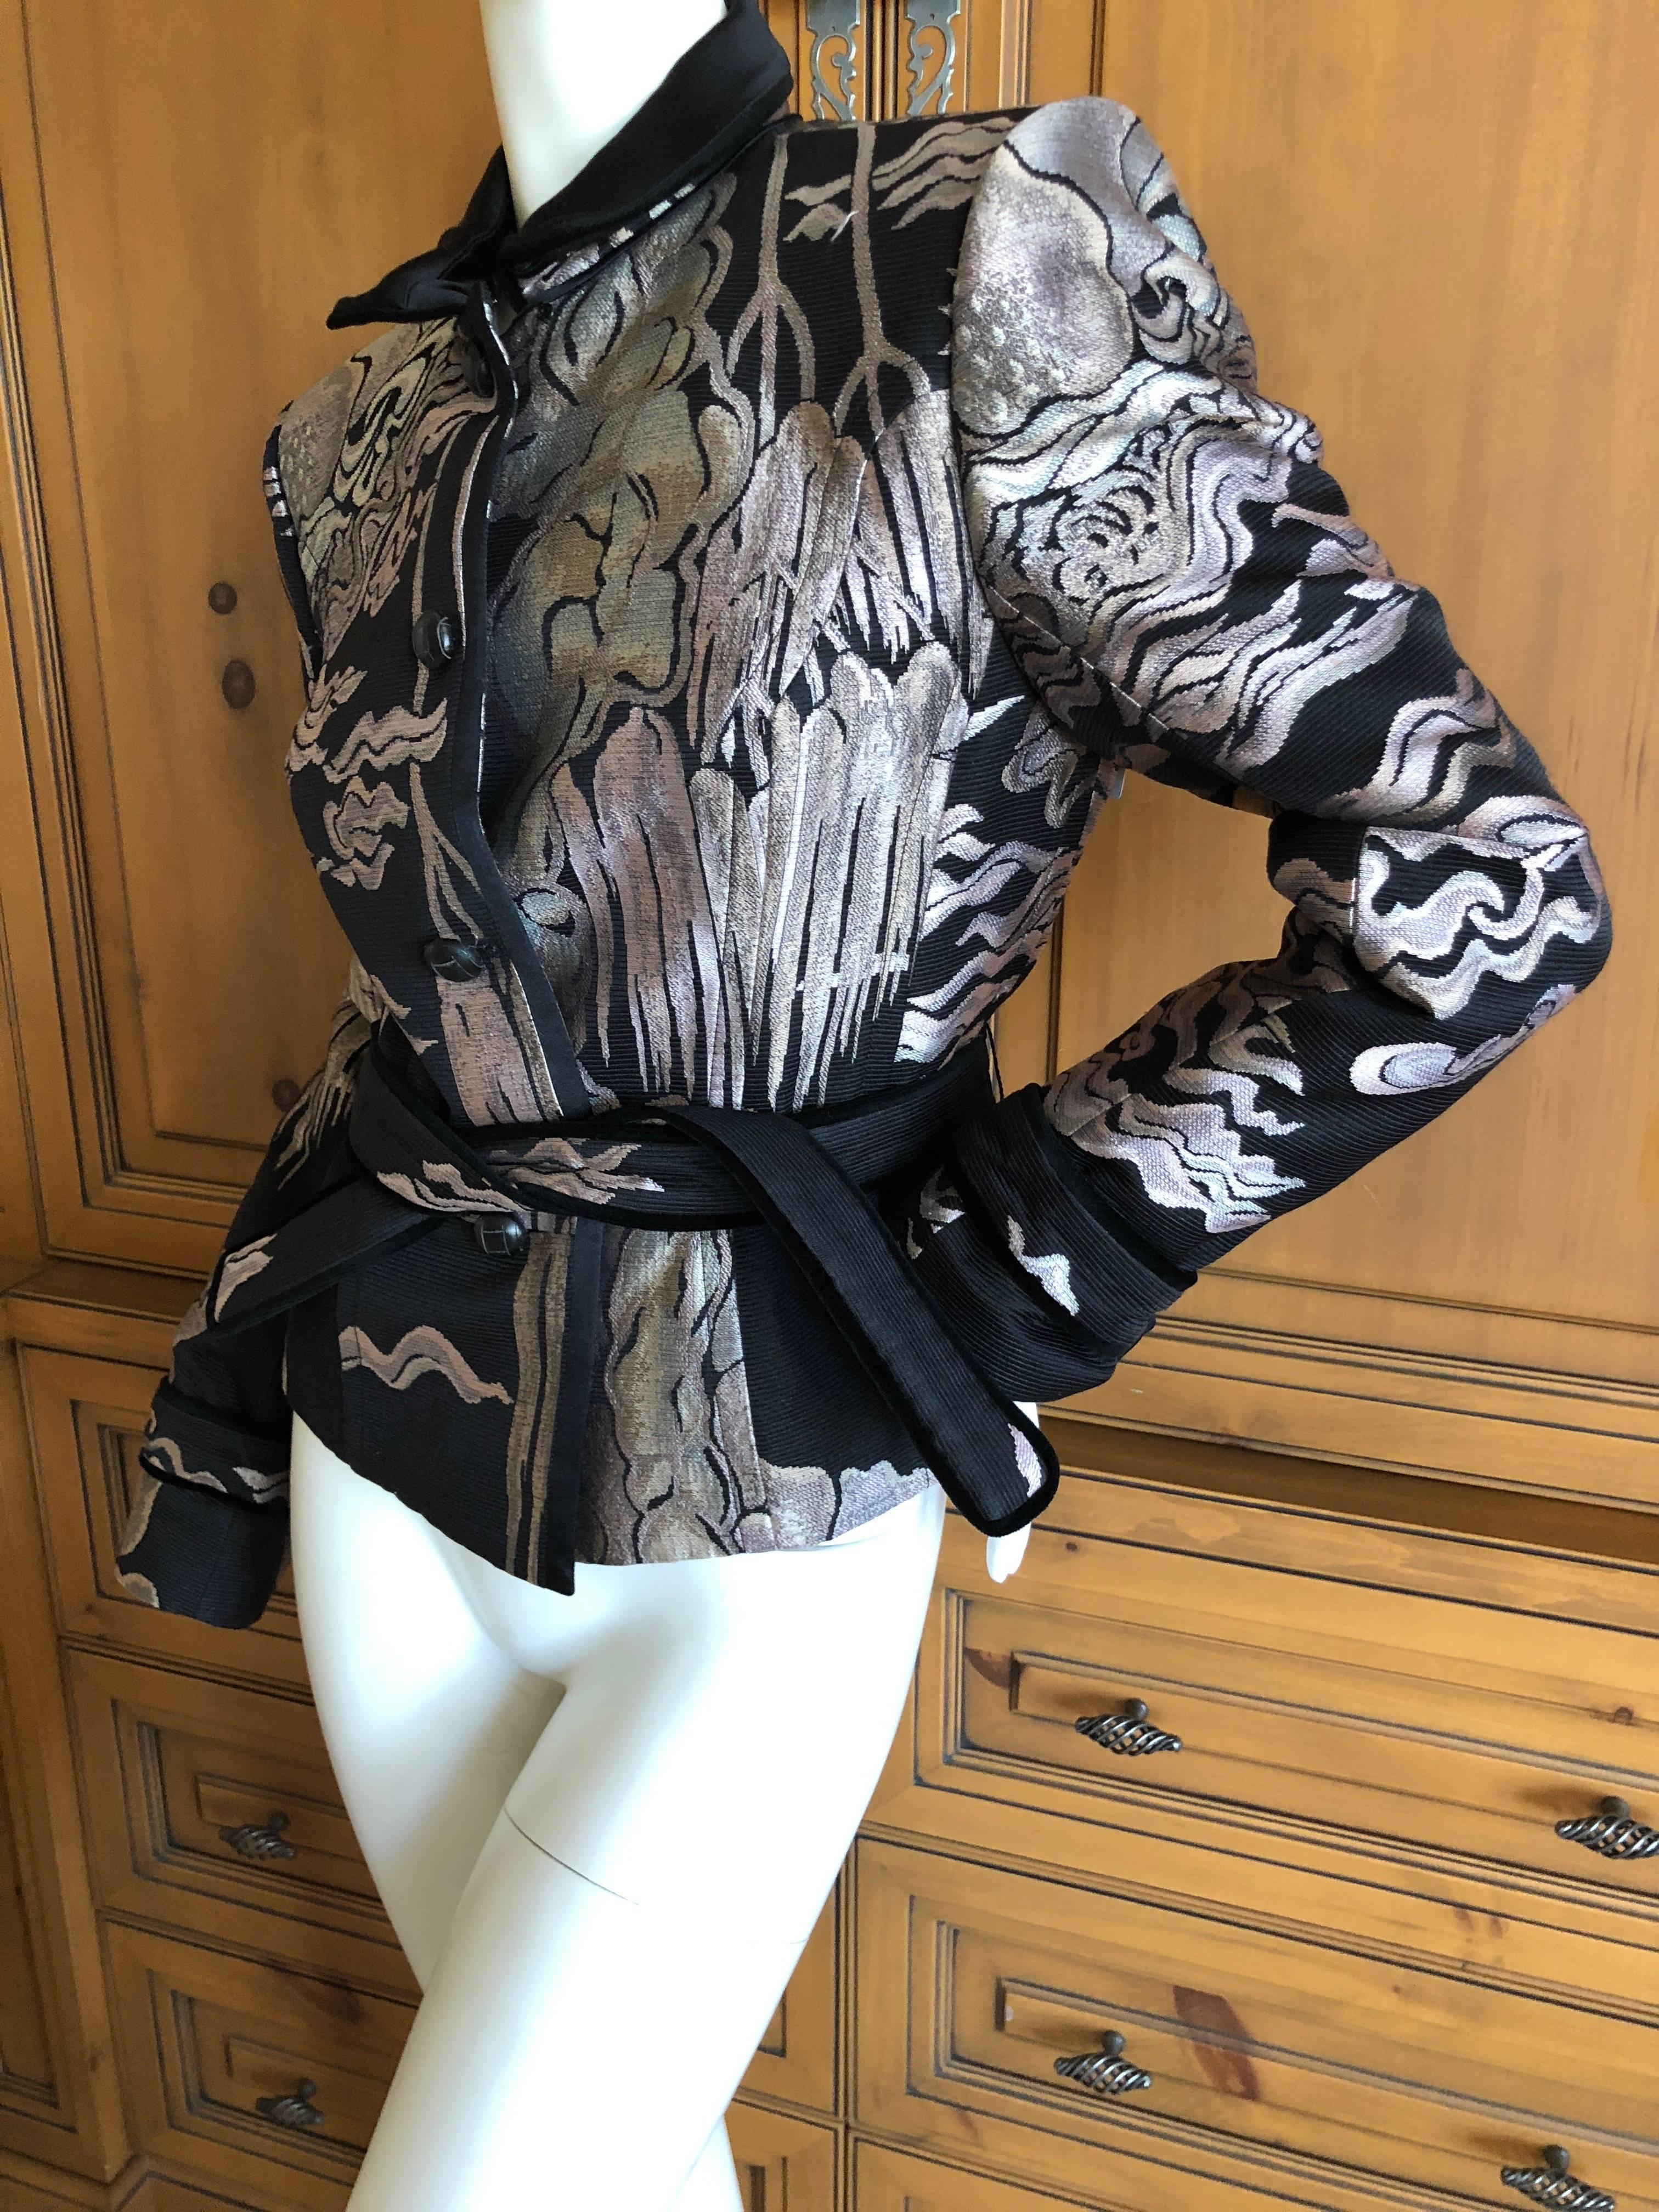 Yves Saint Laurent by Tom Ford Fall 2004 Chinoiserie Jacquard Jacket.
Size 42Bust 38"
Was it 30"
Length 22"
Excellent condition